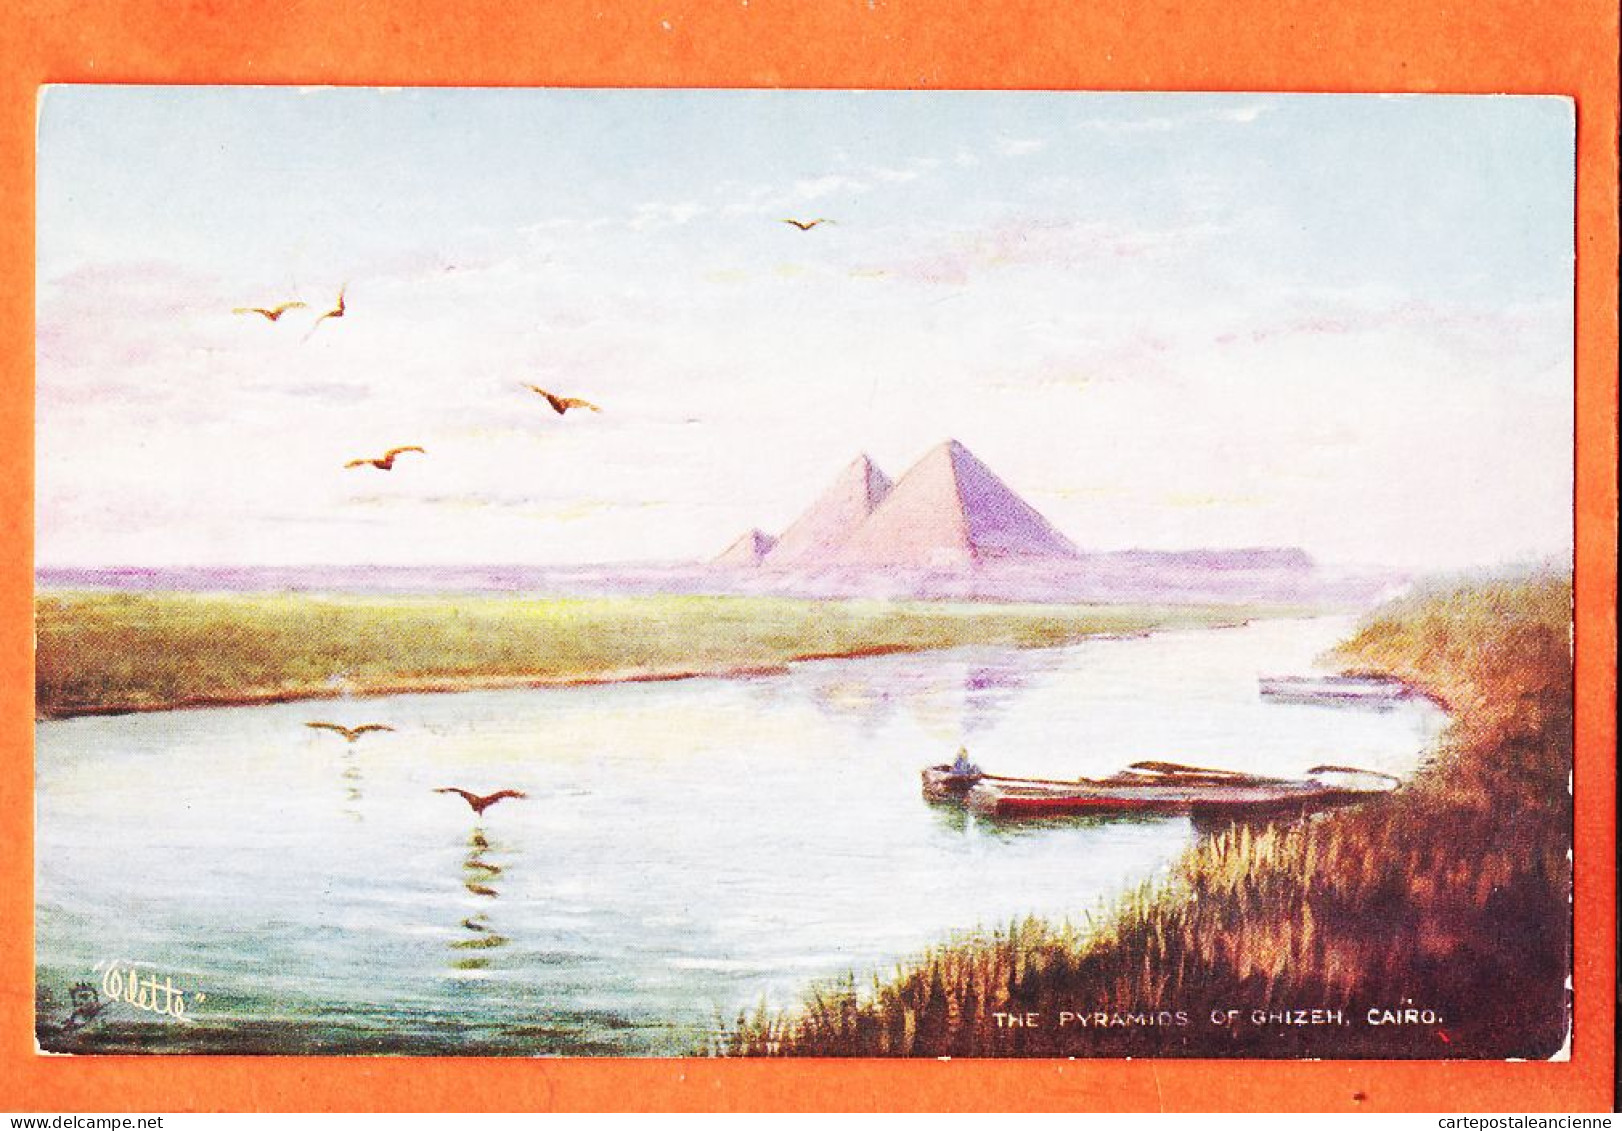 09962 / ⭐  Lithographie OILETTE Egypte ◉ Pyramides CAIRO Pyramids Of GIZEH 1905s ◉ RAPHAEL TUCK Picturesque EGYPT 7201 - Gizeh